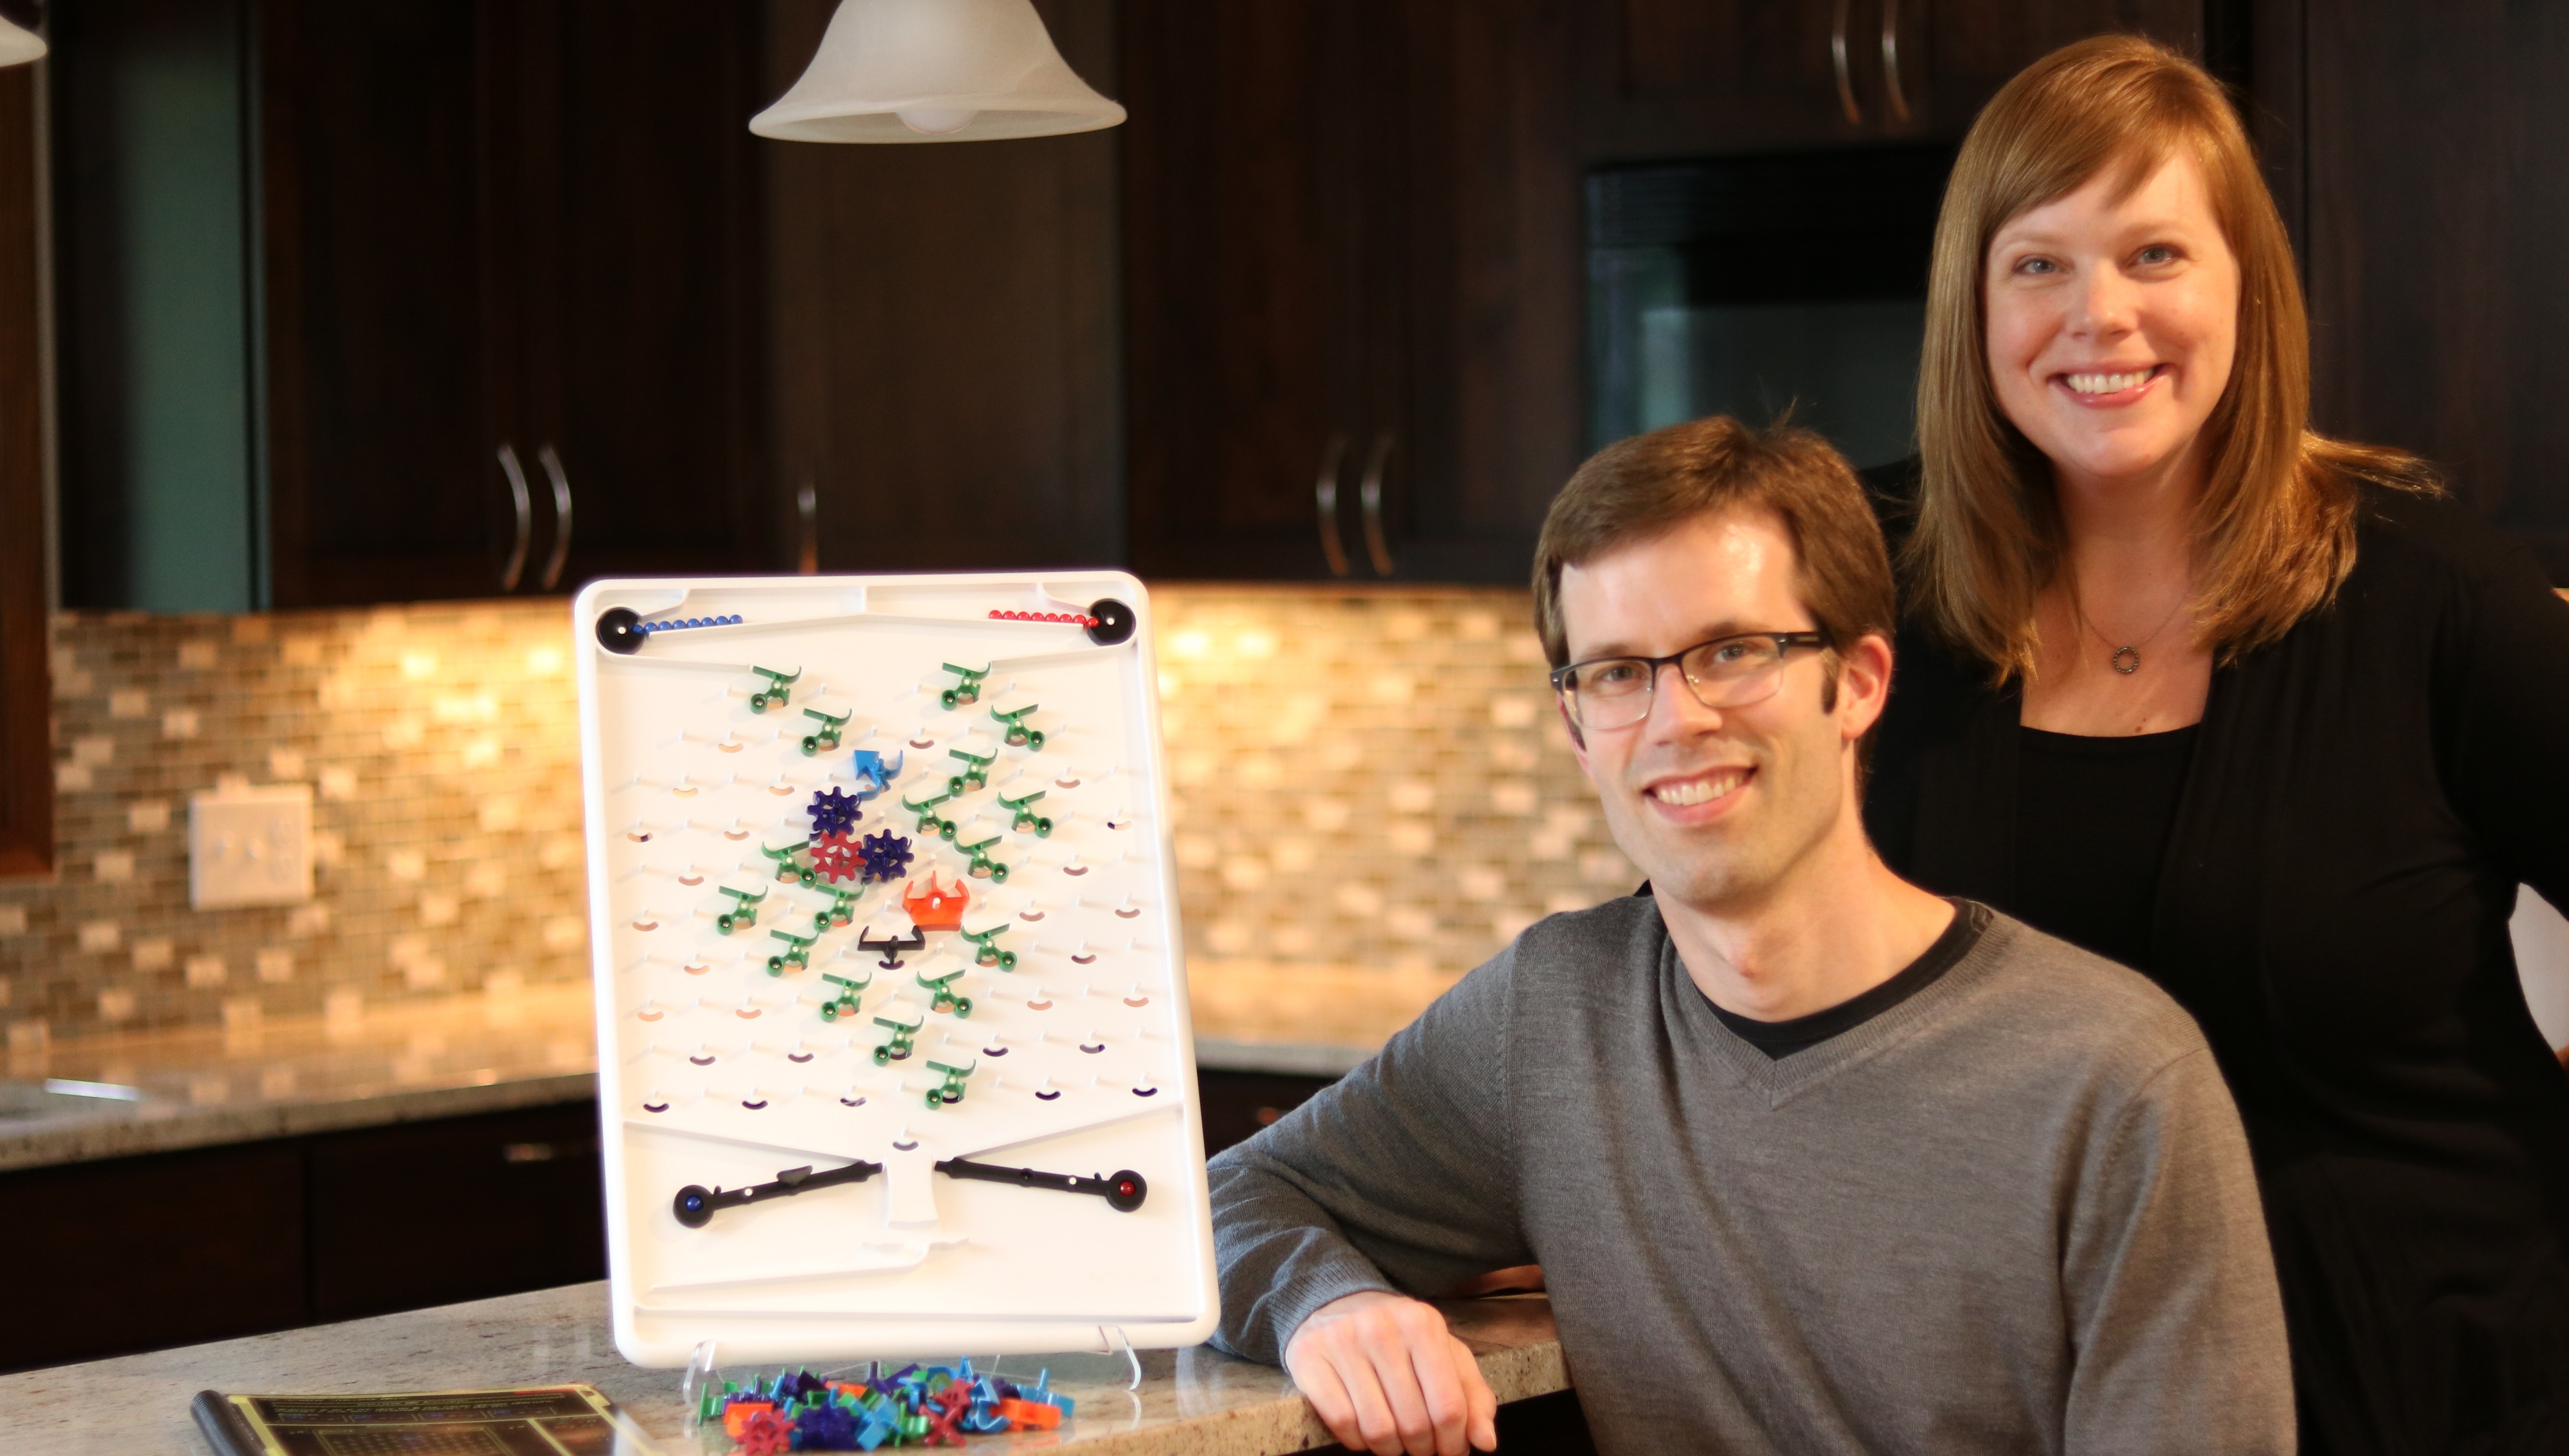 Paul and Alyssa with their prototyped Turing Tumble